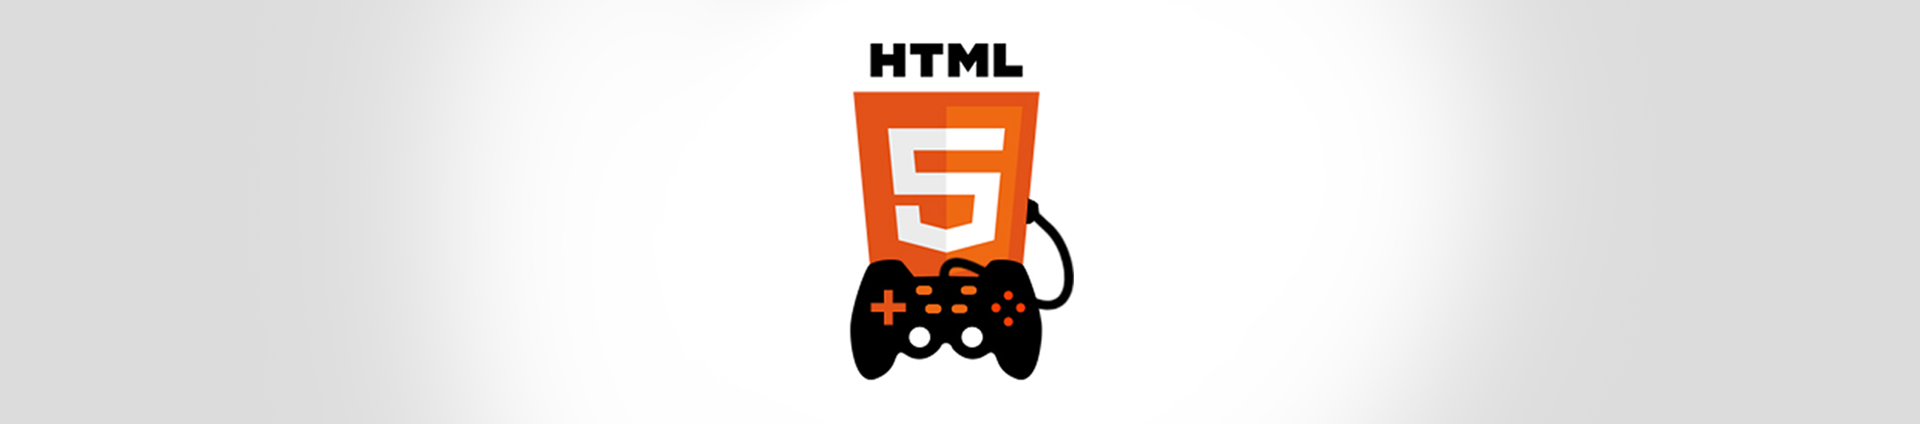 HTML5 GAMES 🎮 - Play Online Games!